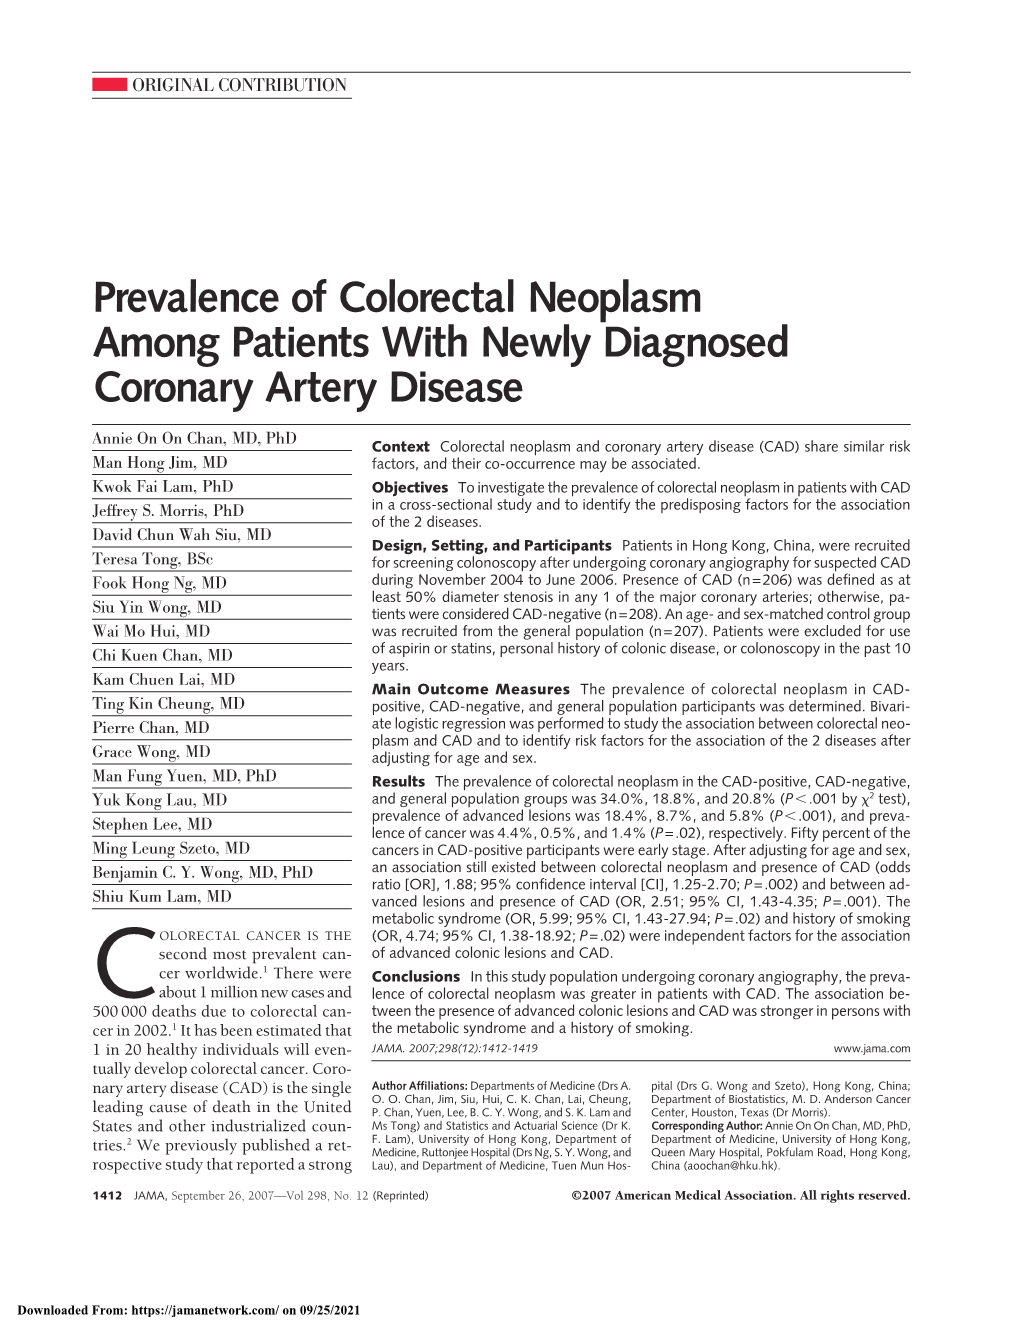 Prevalence of Colorectal Neoplasm Among Patients with Newly Diagnosed Coronary Artery Disease